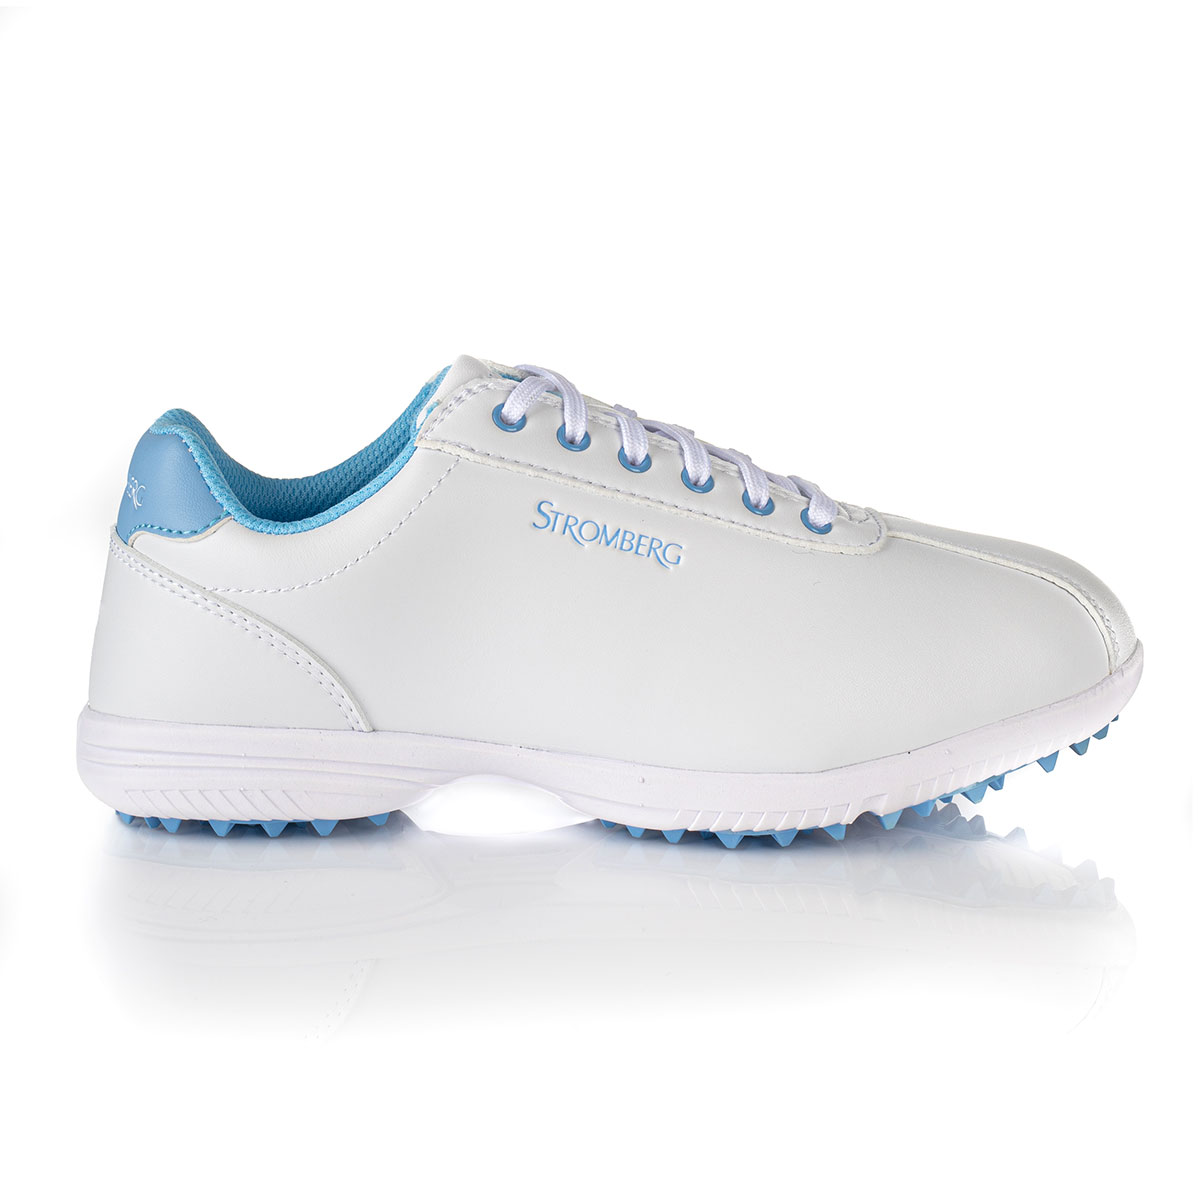 Stromberg Ladies Mia Waterproof Spikeless Golf Shoes - White & Baby Blue